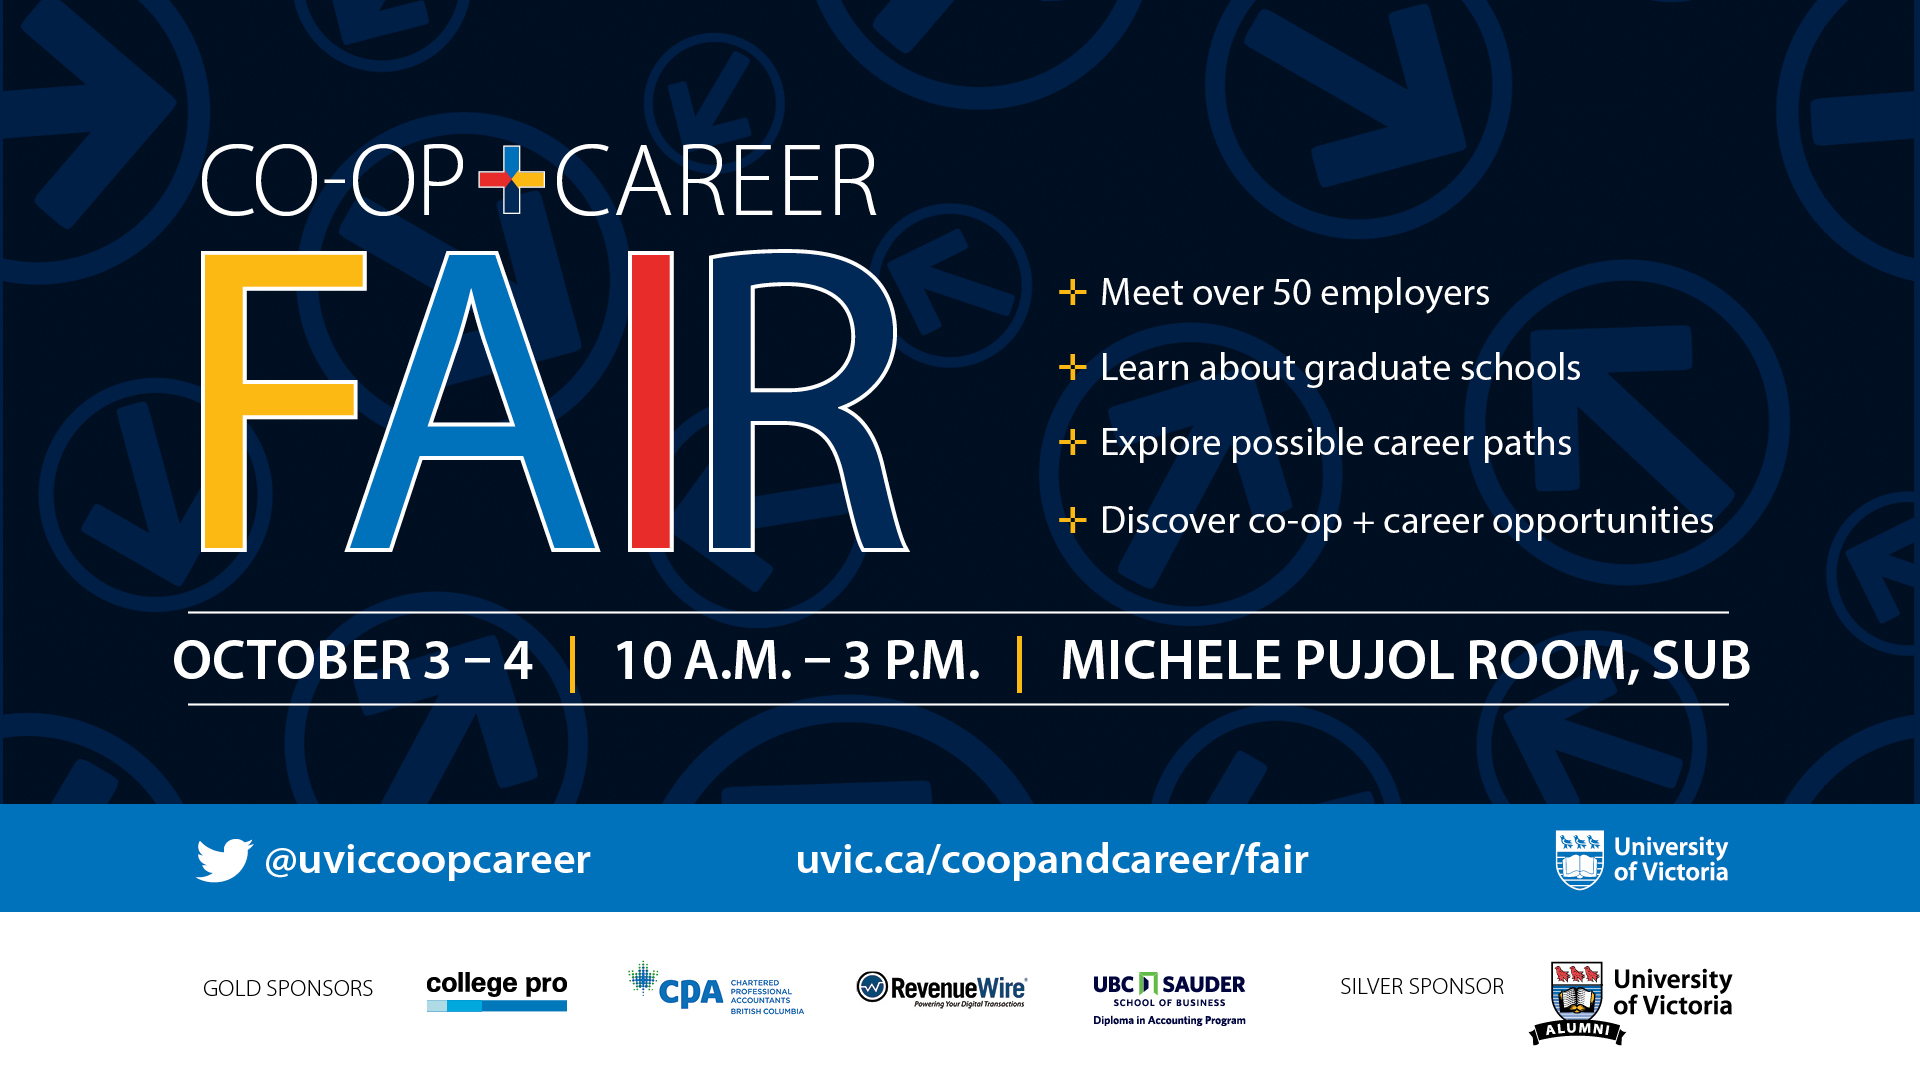 Co-op and Career Fair - Oct 3-4